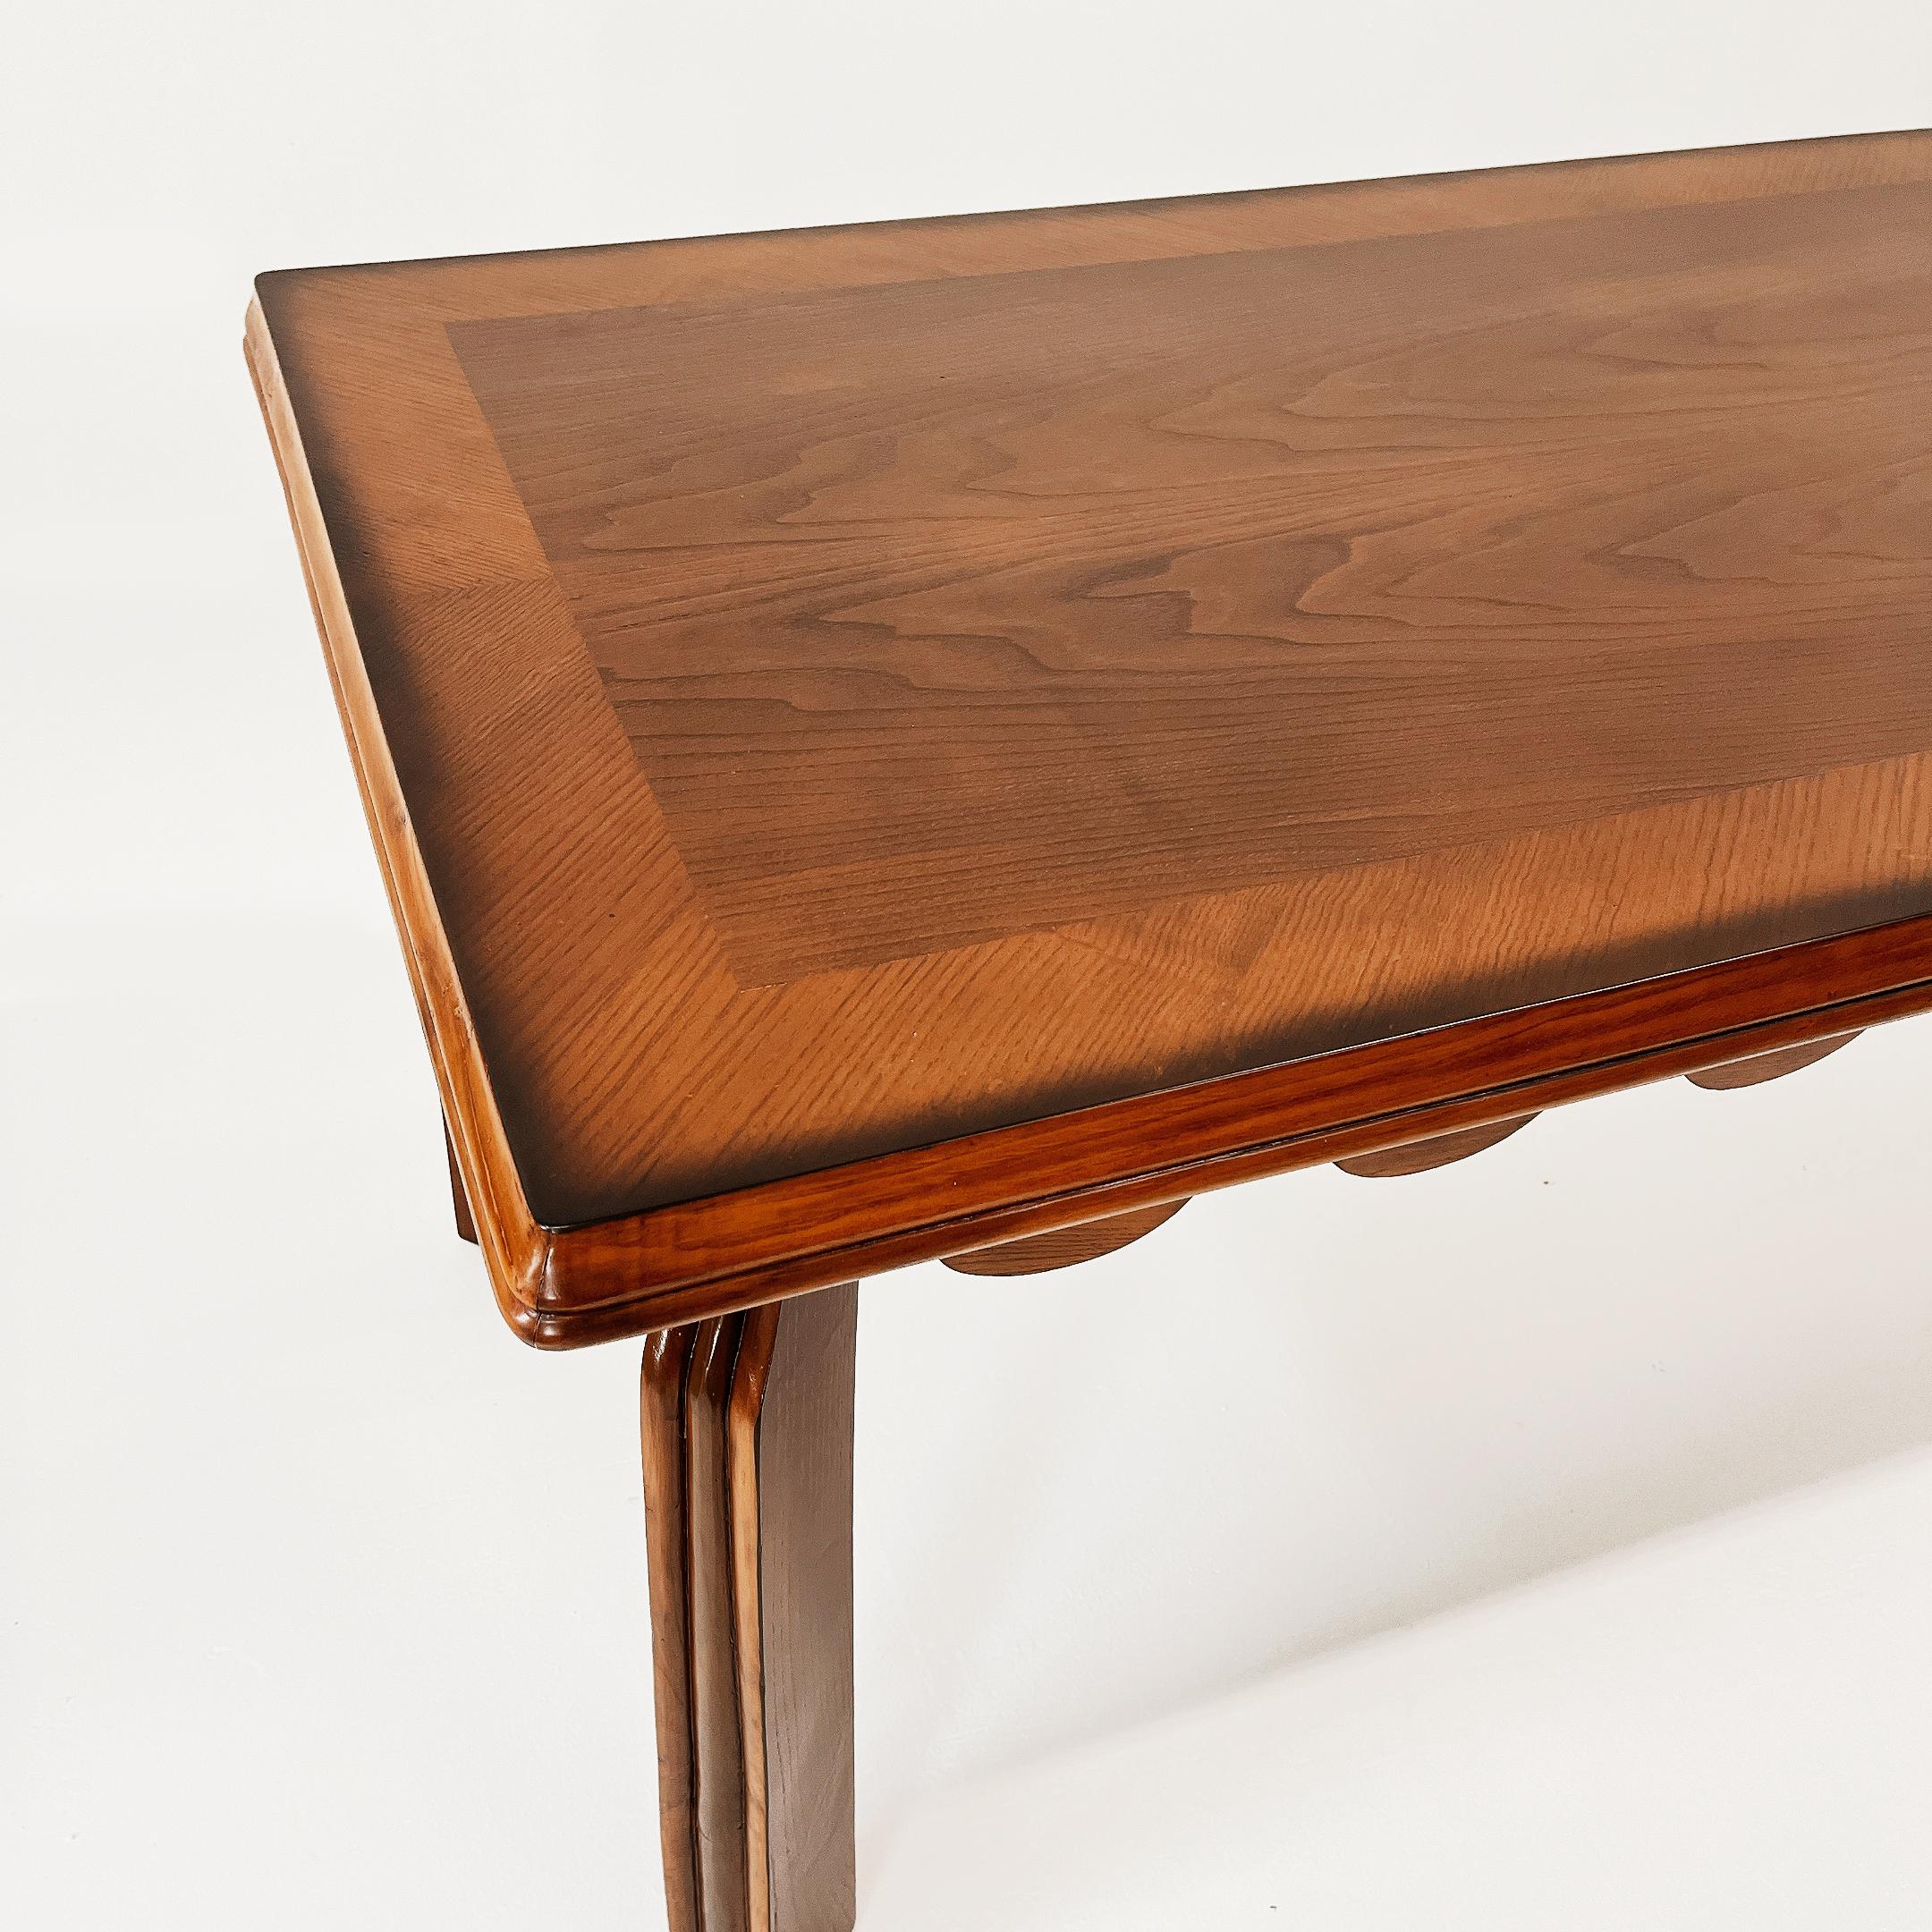 A rare Italian design dining table by Paolo Buffa in Mahogany wood, made in the early 1940's referred as a modern design work. The piece evokes in significant ways the iconic style of Buffa with its scallop carved shapes.